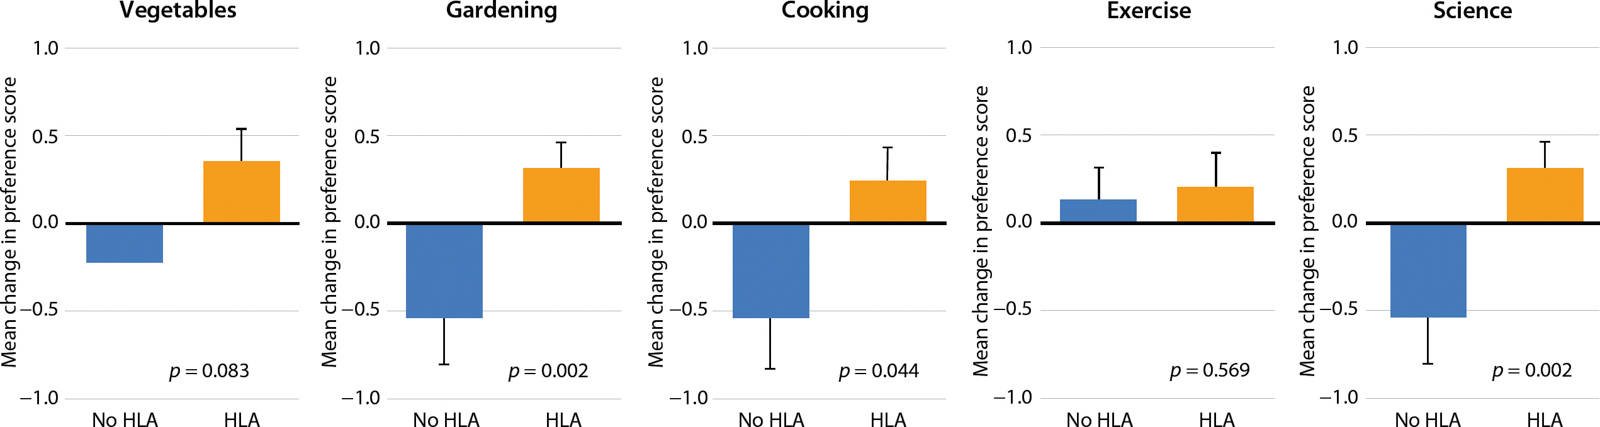 Increases in elementary school children's preferences toward gardening (p = 0.002), cooking (p = 0.044), and science (p = 0.002) were significantly higher after the HLA program (n = 71) compared to controls (n = 22). The scale used was based on 0 = sad face and 5 = happy face. A Mann-Whitney test (two-tailed) was performed for these comparisons. Data represents mean and SEM.